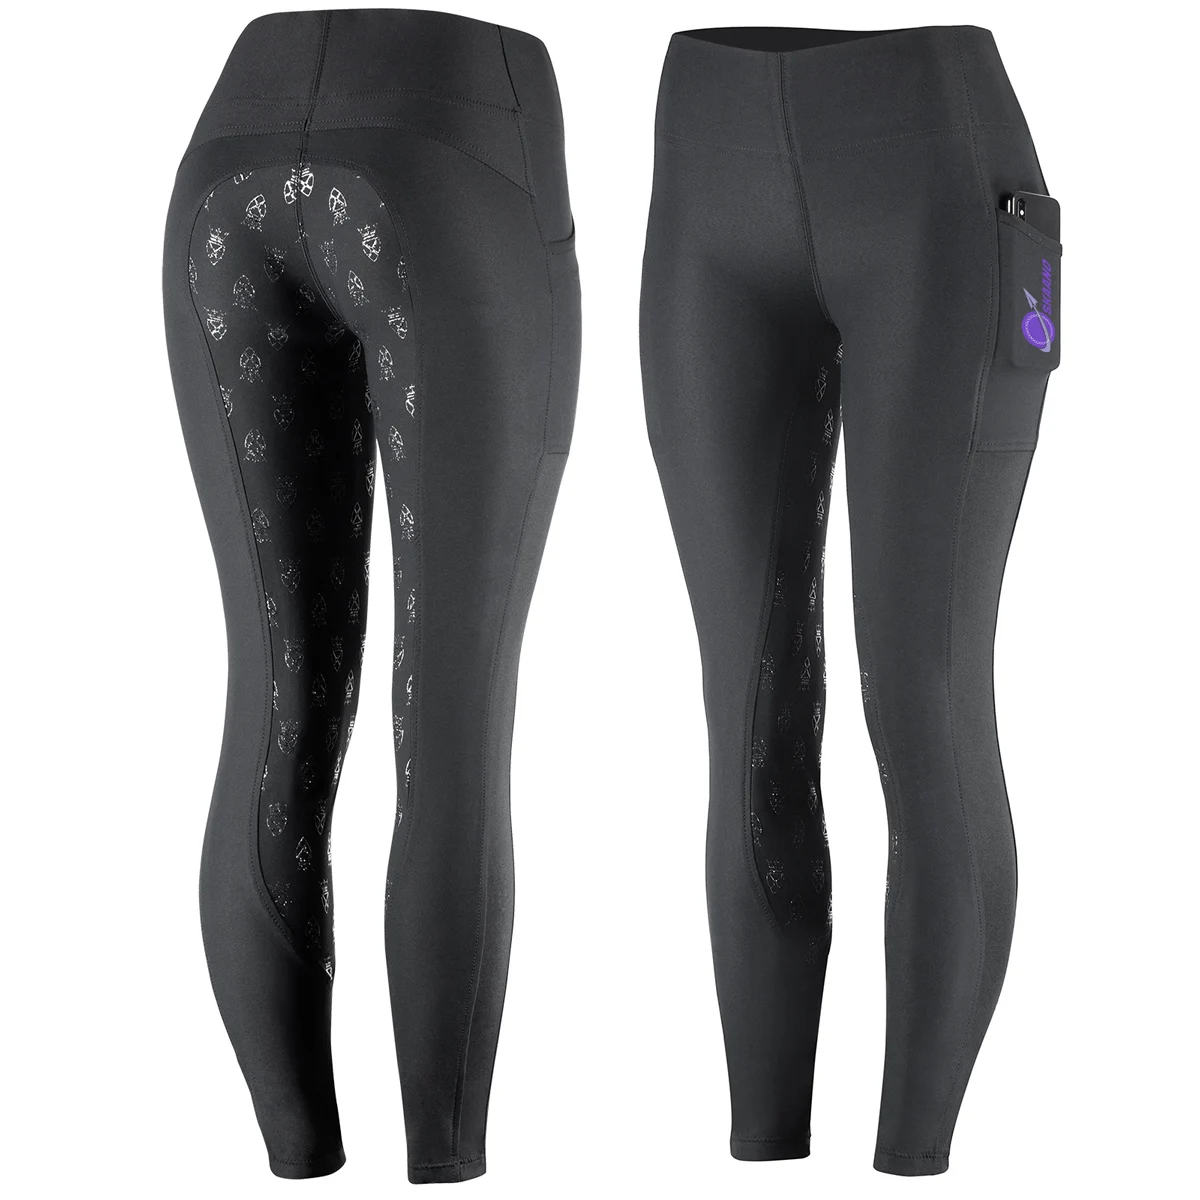 Riding Tights With Phone Pockets Silicon Seat Horse Riding Tights Riding Legging